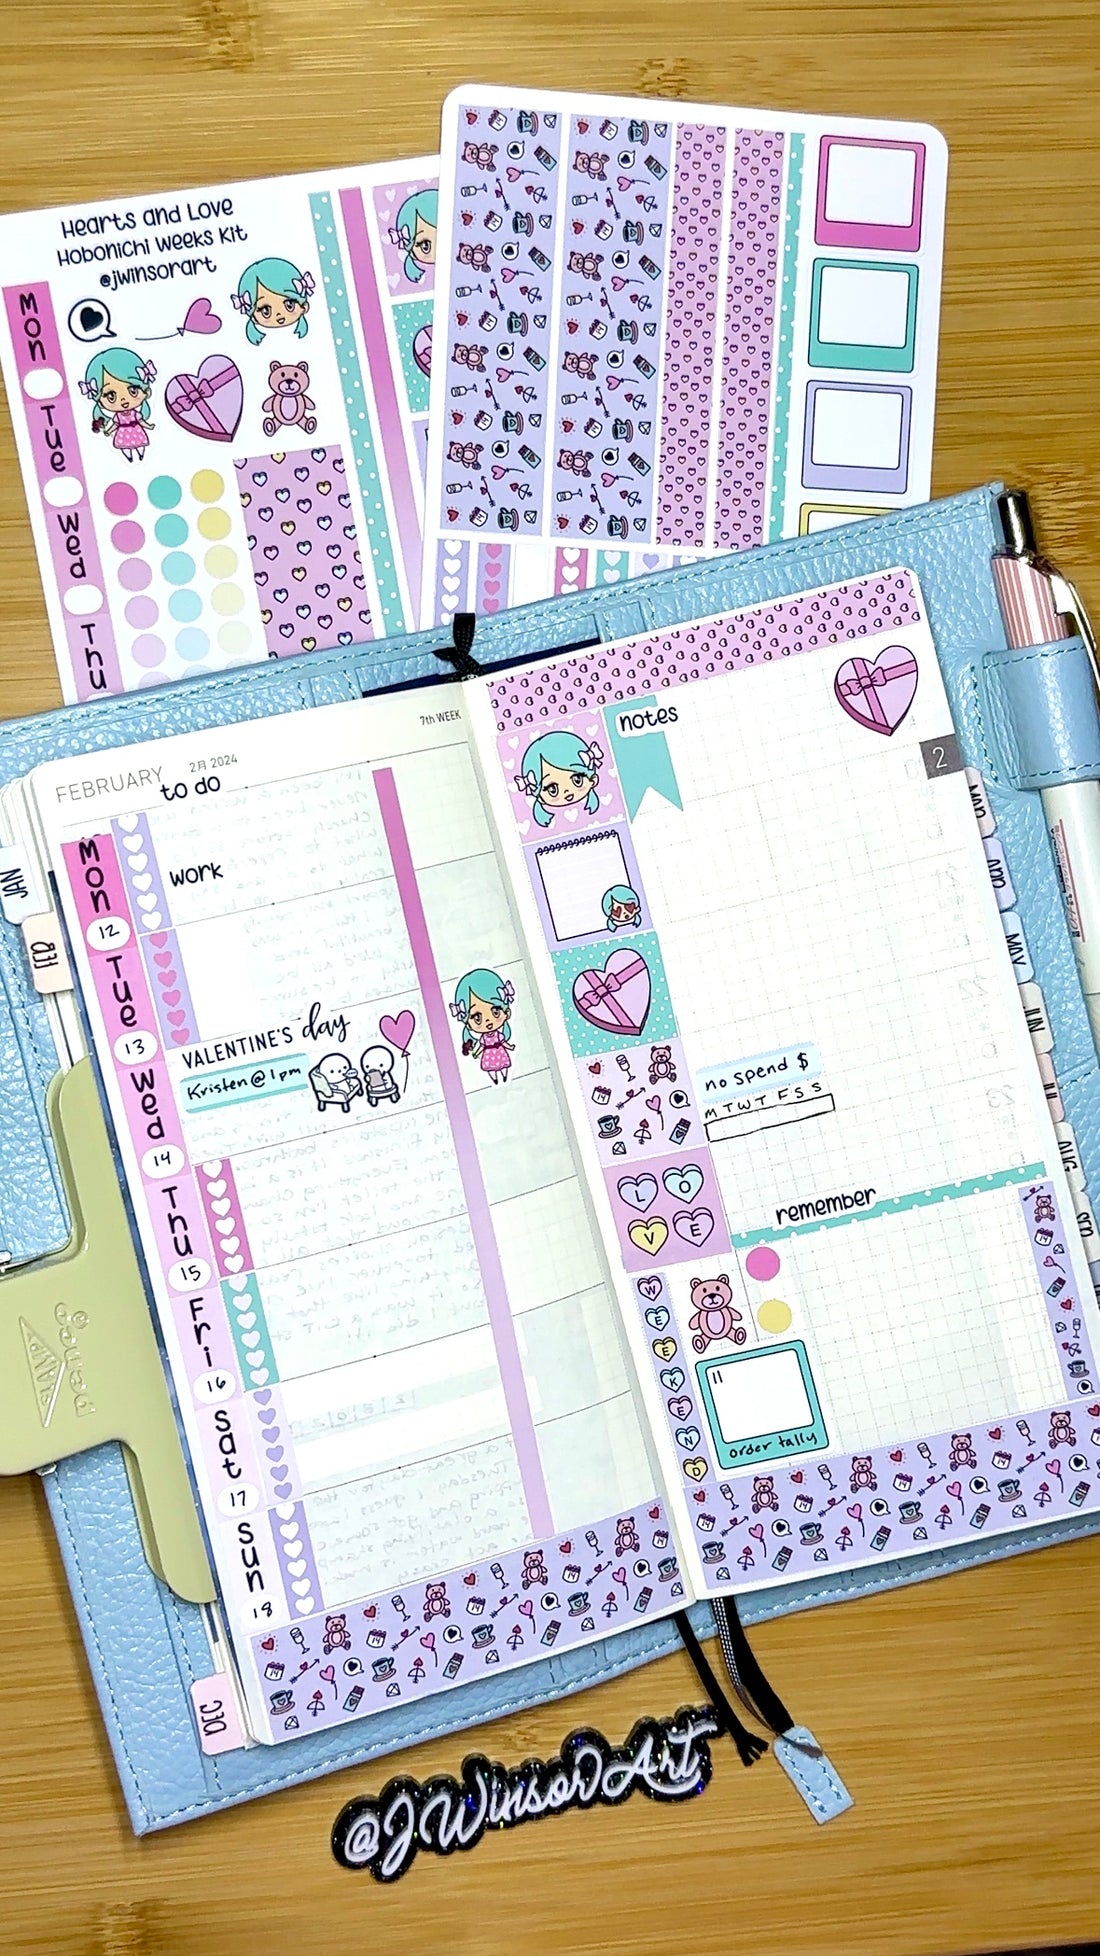 Confessions of a Sticker Junkie: A Planner Addict's Tale